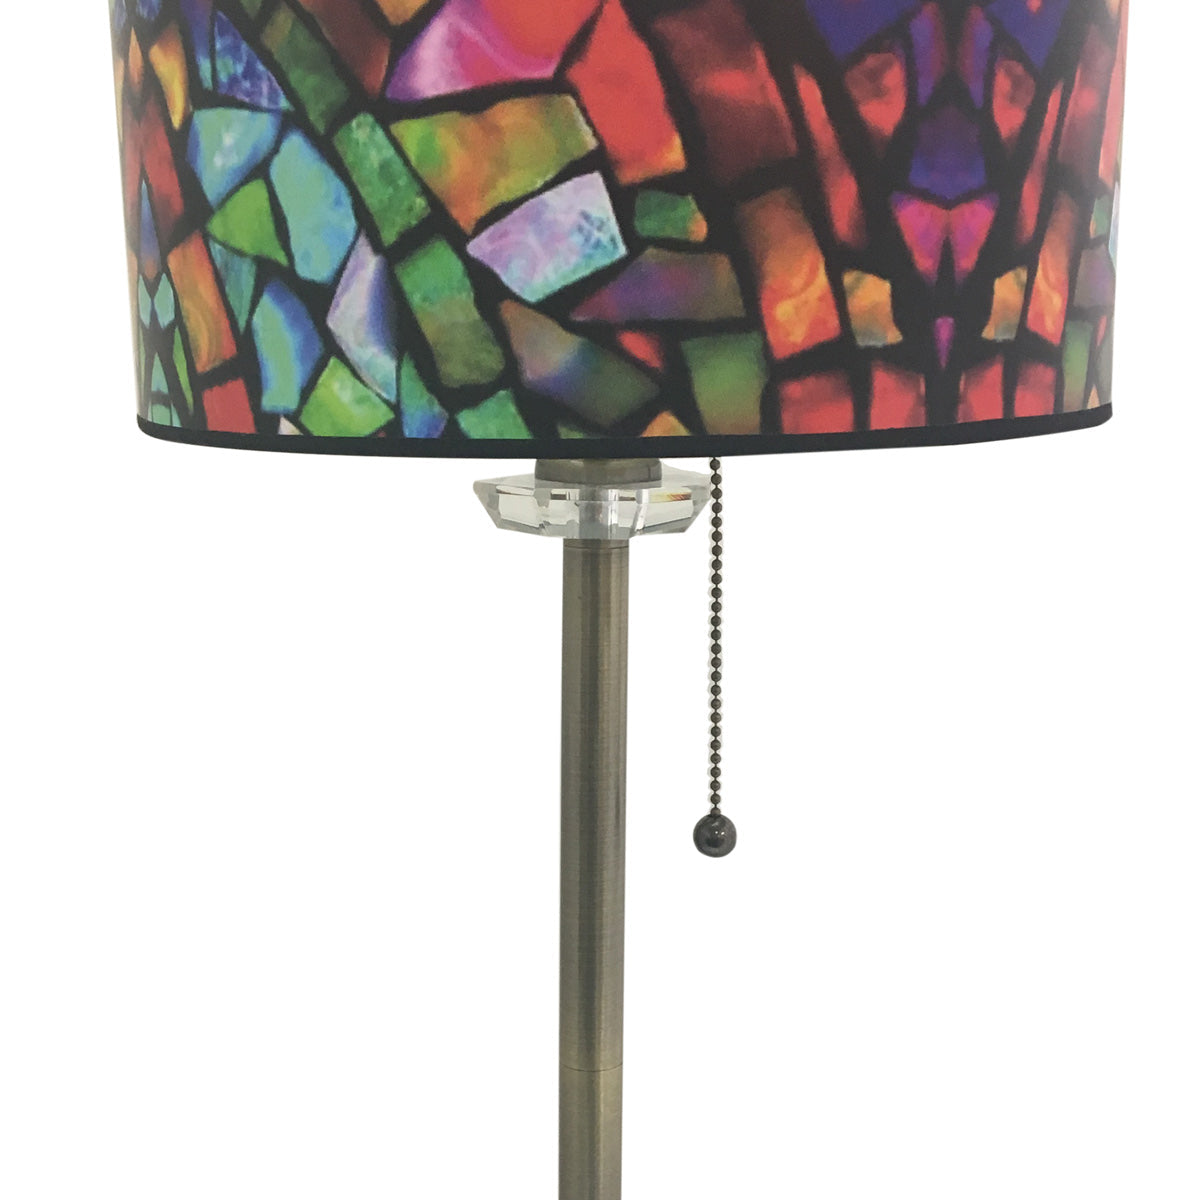 Royal Designs 28" Crystal and Antique Brass Buffet Lamp with Mosaic Stained Glass Design Hardback Lamp Shade